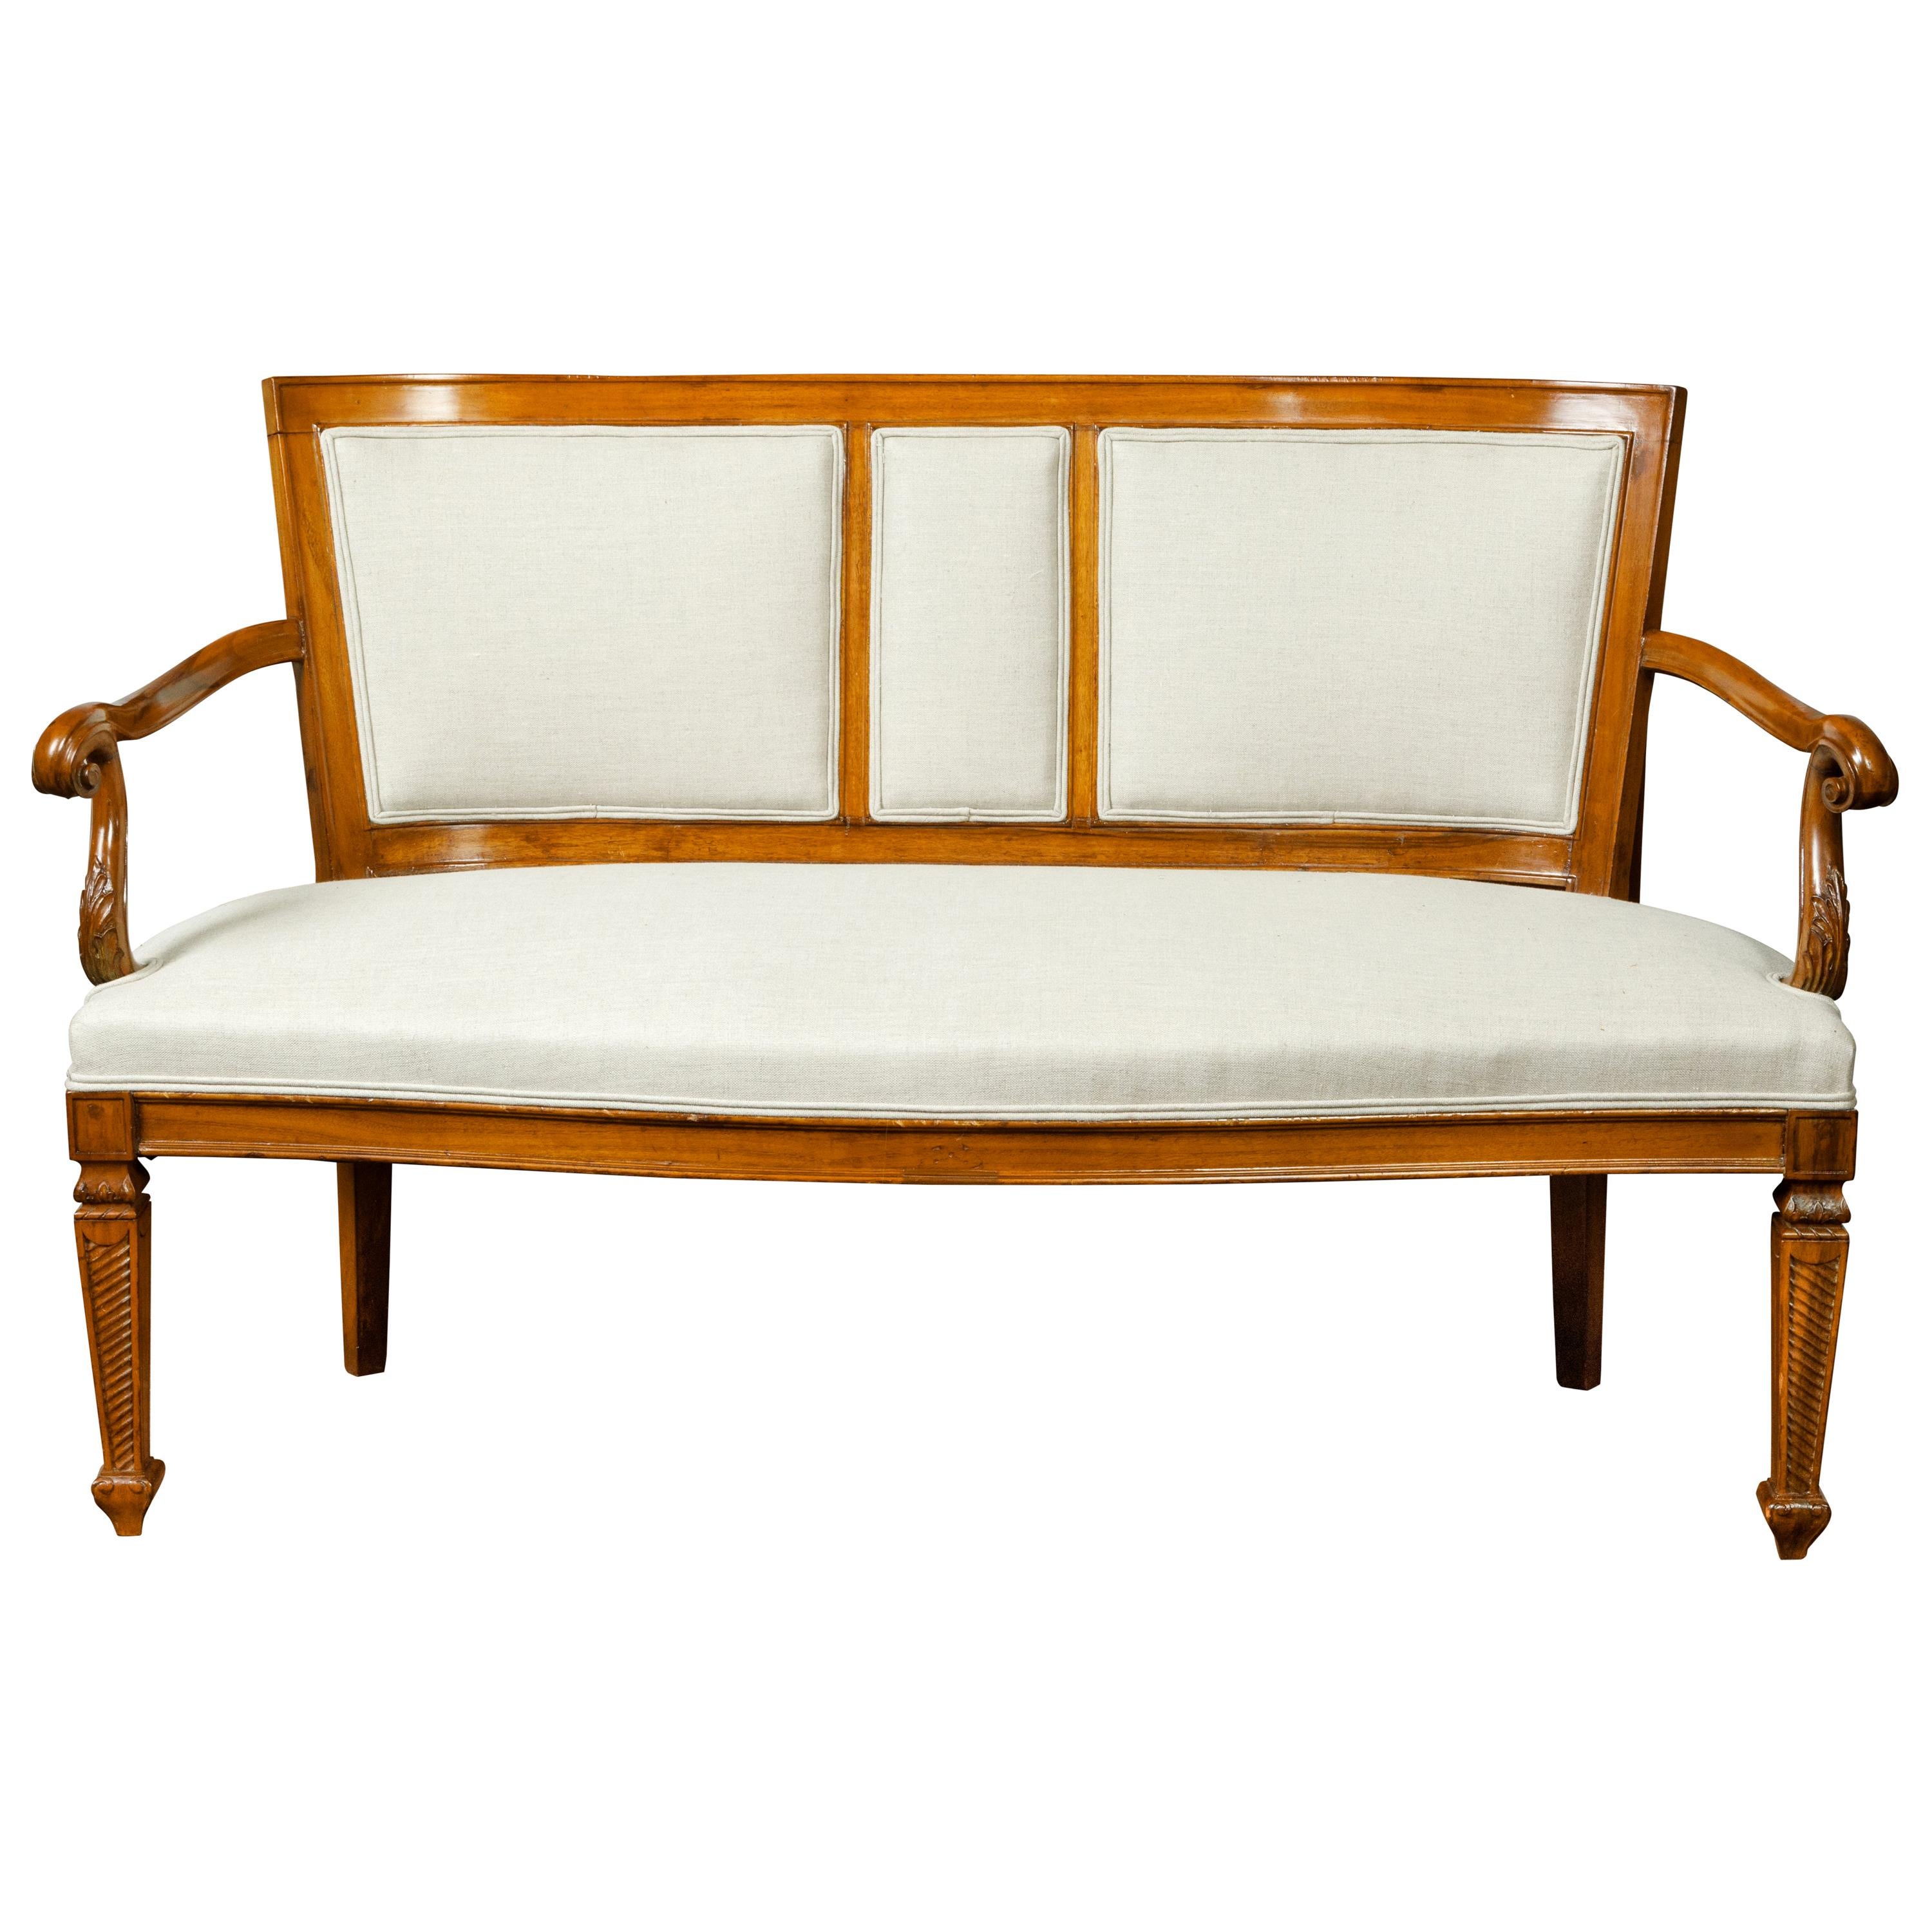 Italian 19th Century Carved Walnut Upholstered Settee with Scrolling Arms